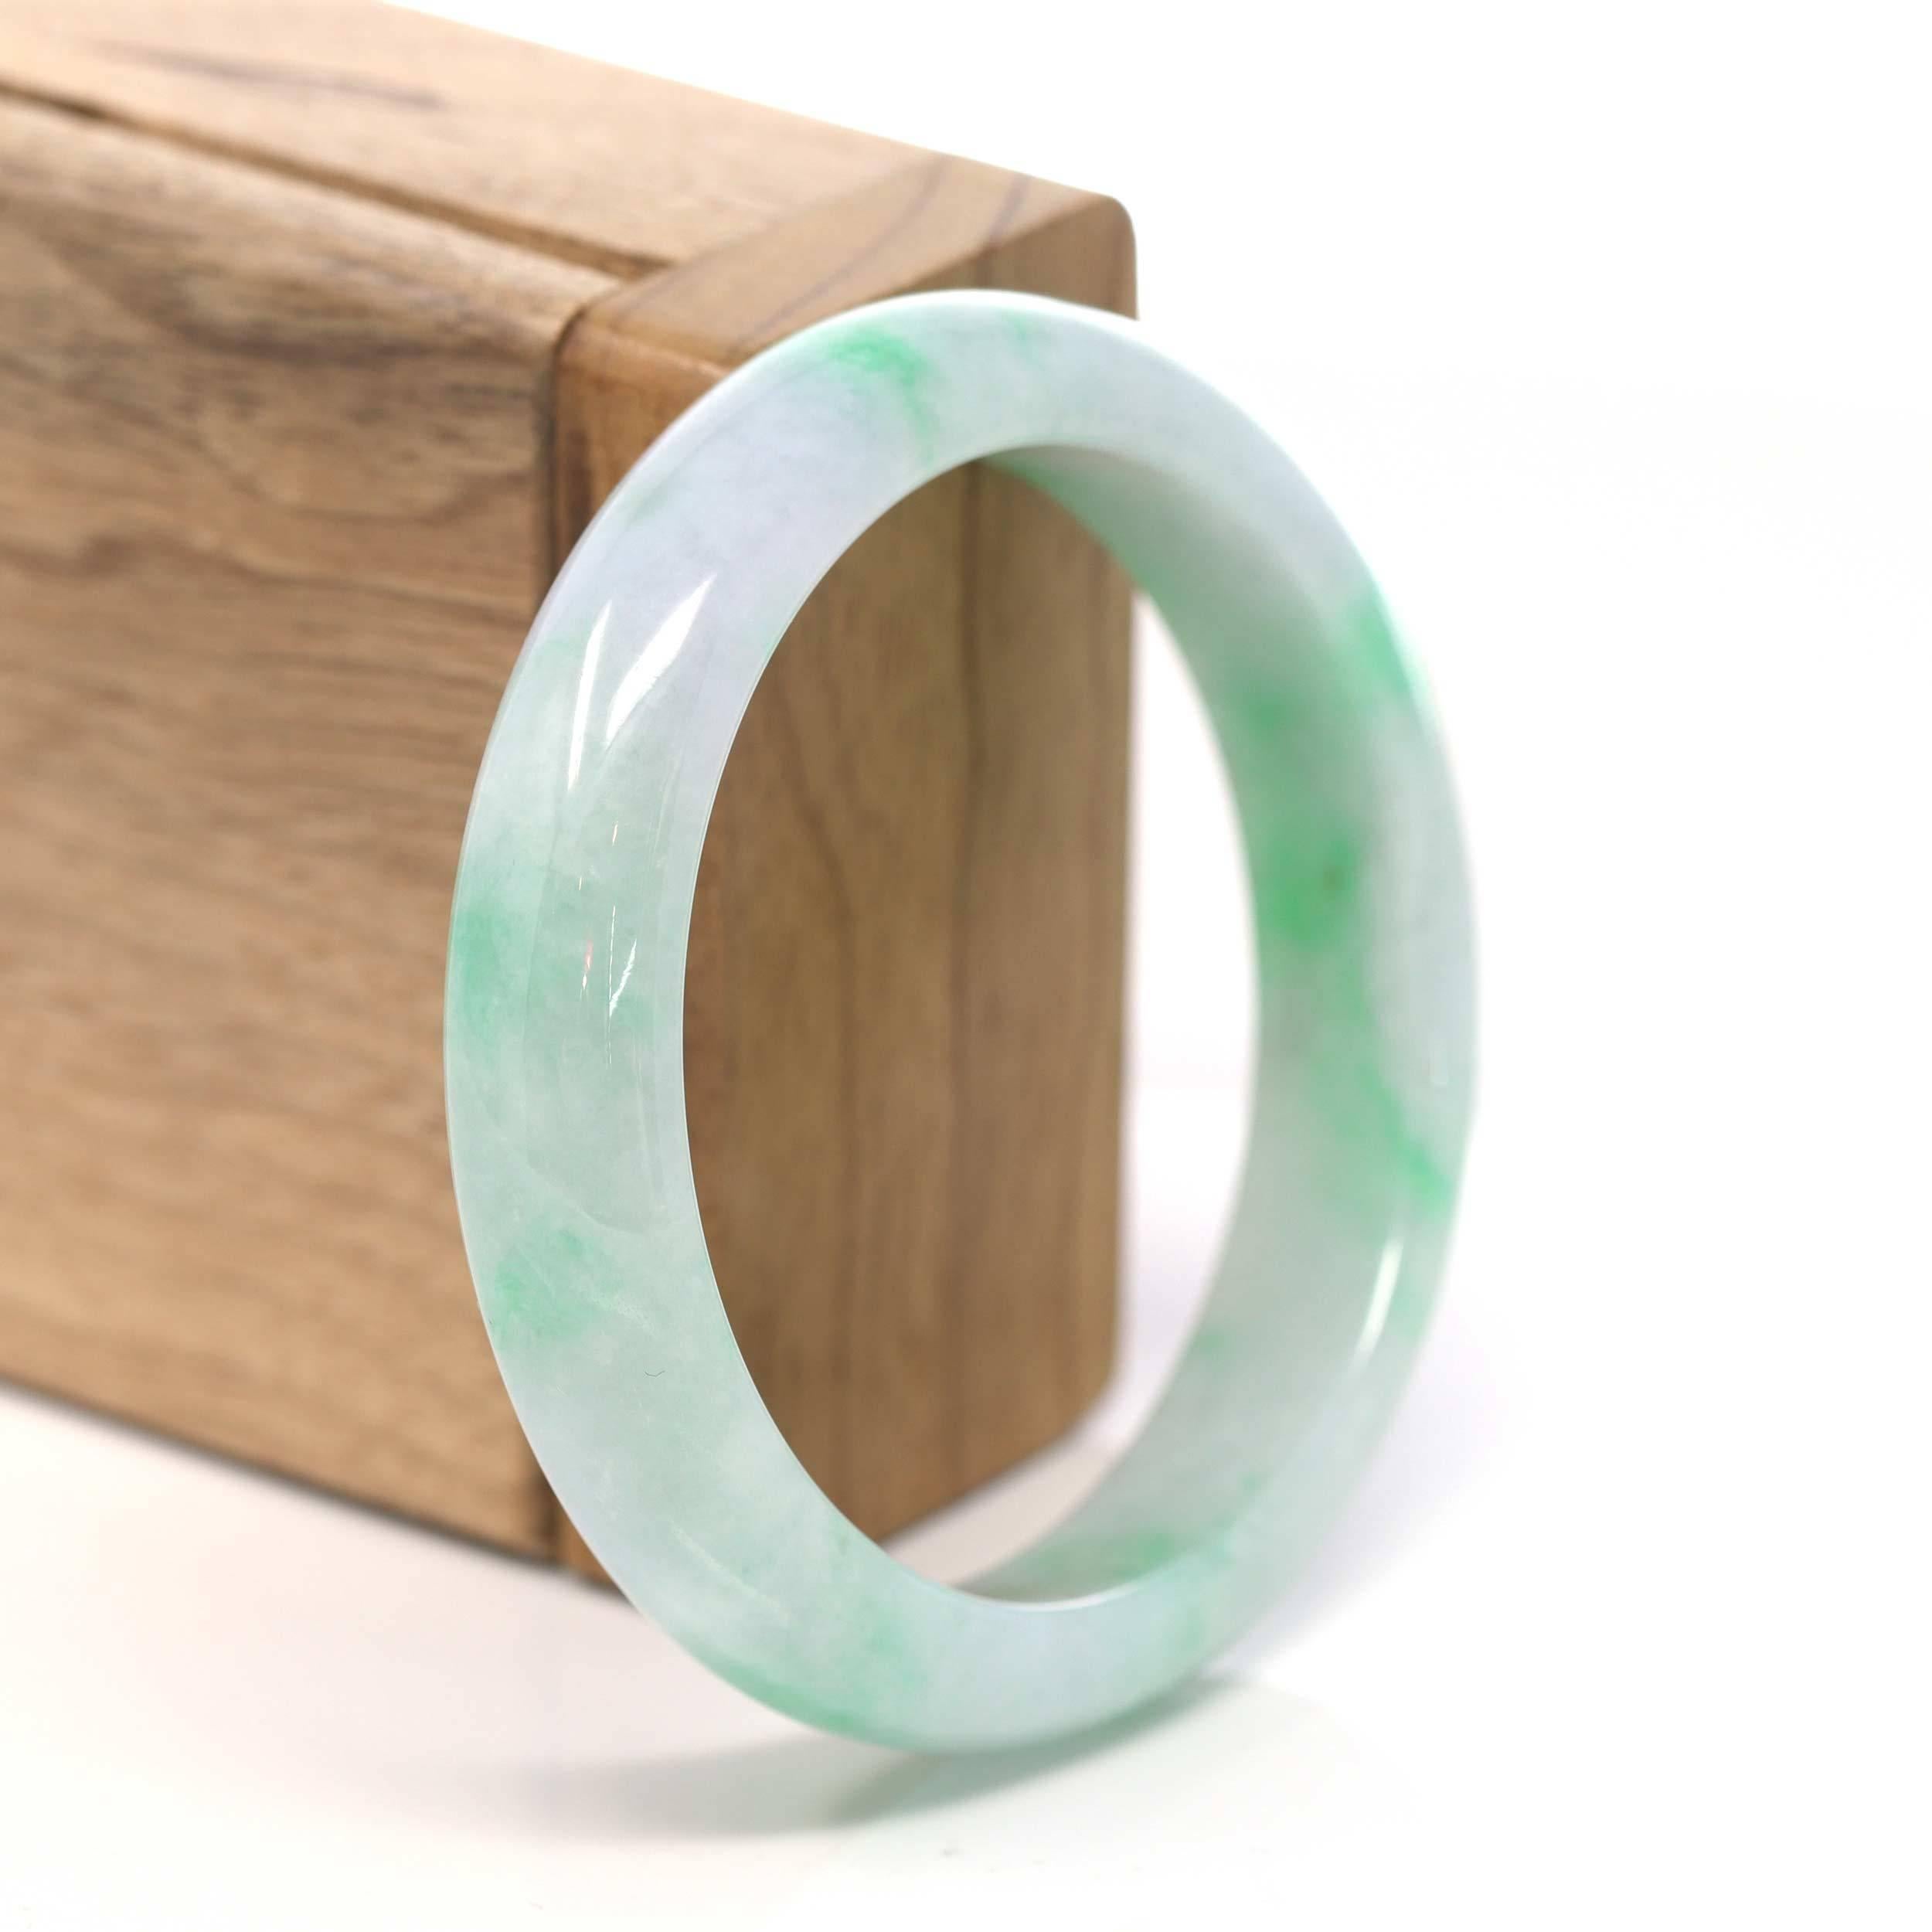  * DETAILS--- Natural Light Green Genuine Burmese Jadeite Jade Bangle Bracelet.  All Baikalla Jewelry's Jade Bangles are guaranteed to be untreated. The jade texture is relatively fine with some patches of varieties of gorgeous green lavender colors